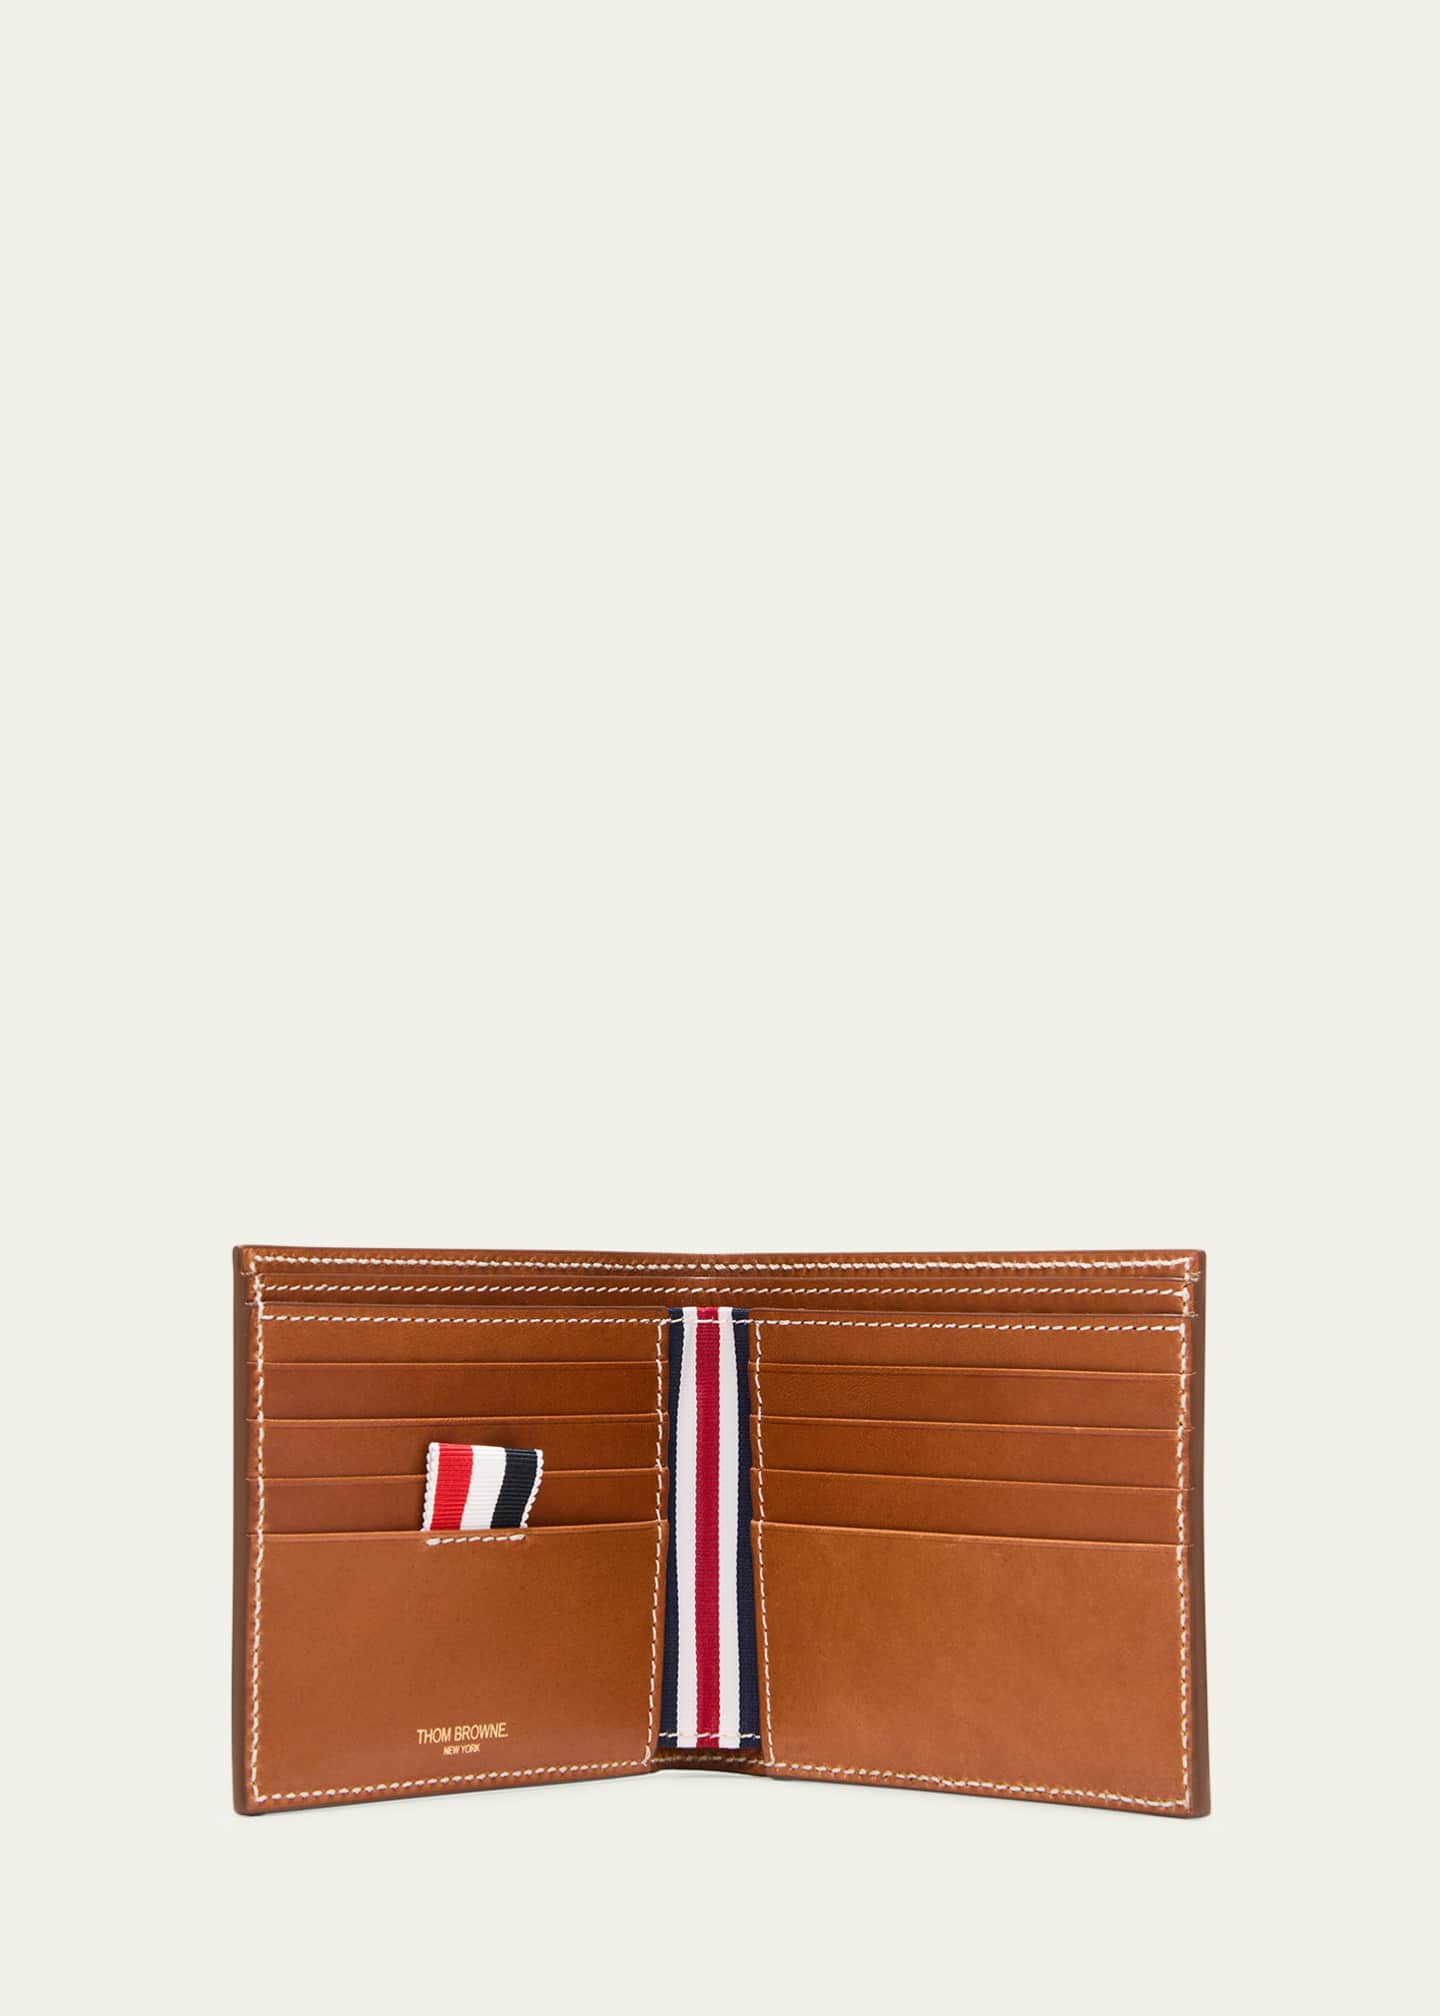 No. 4 Leather Billfold Wallet